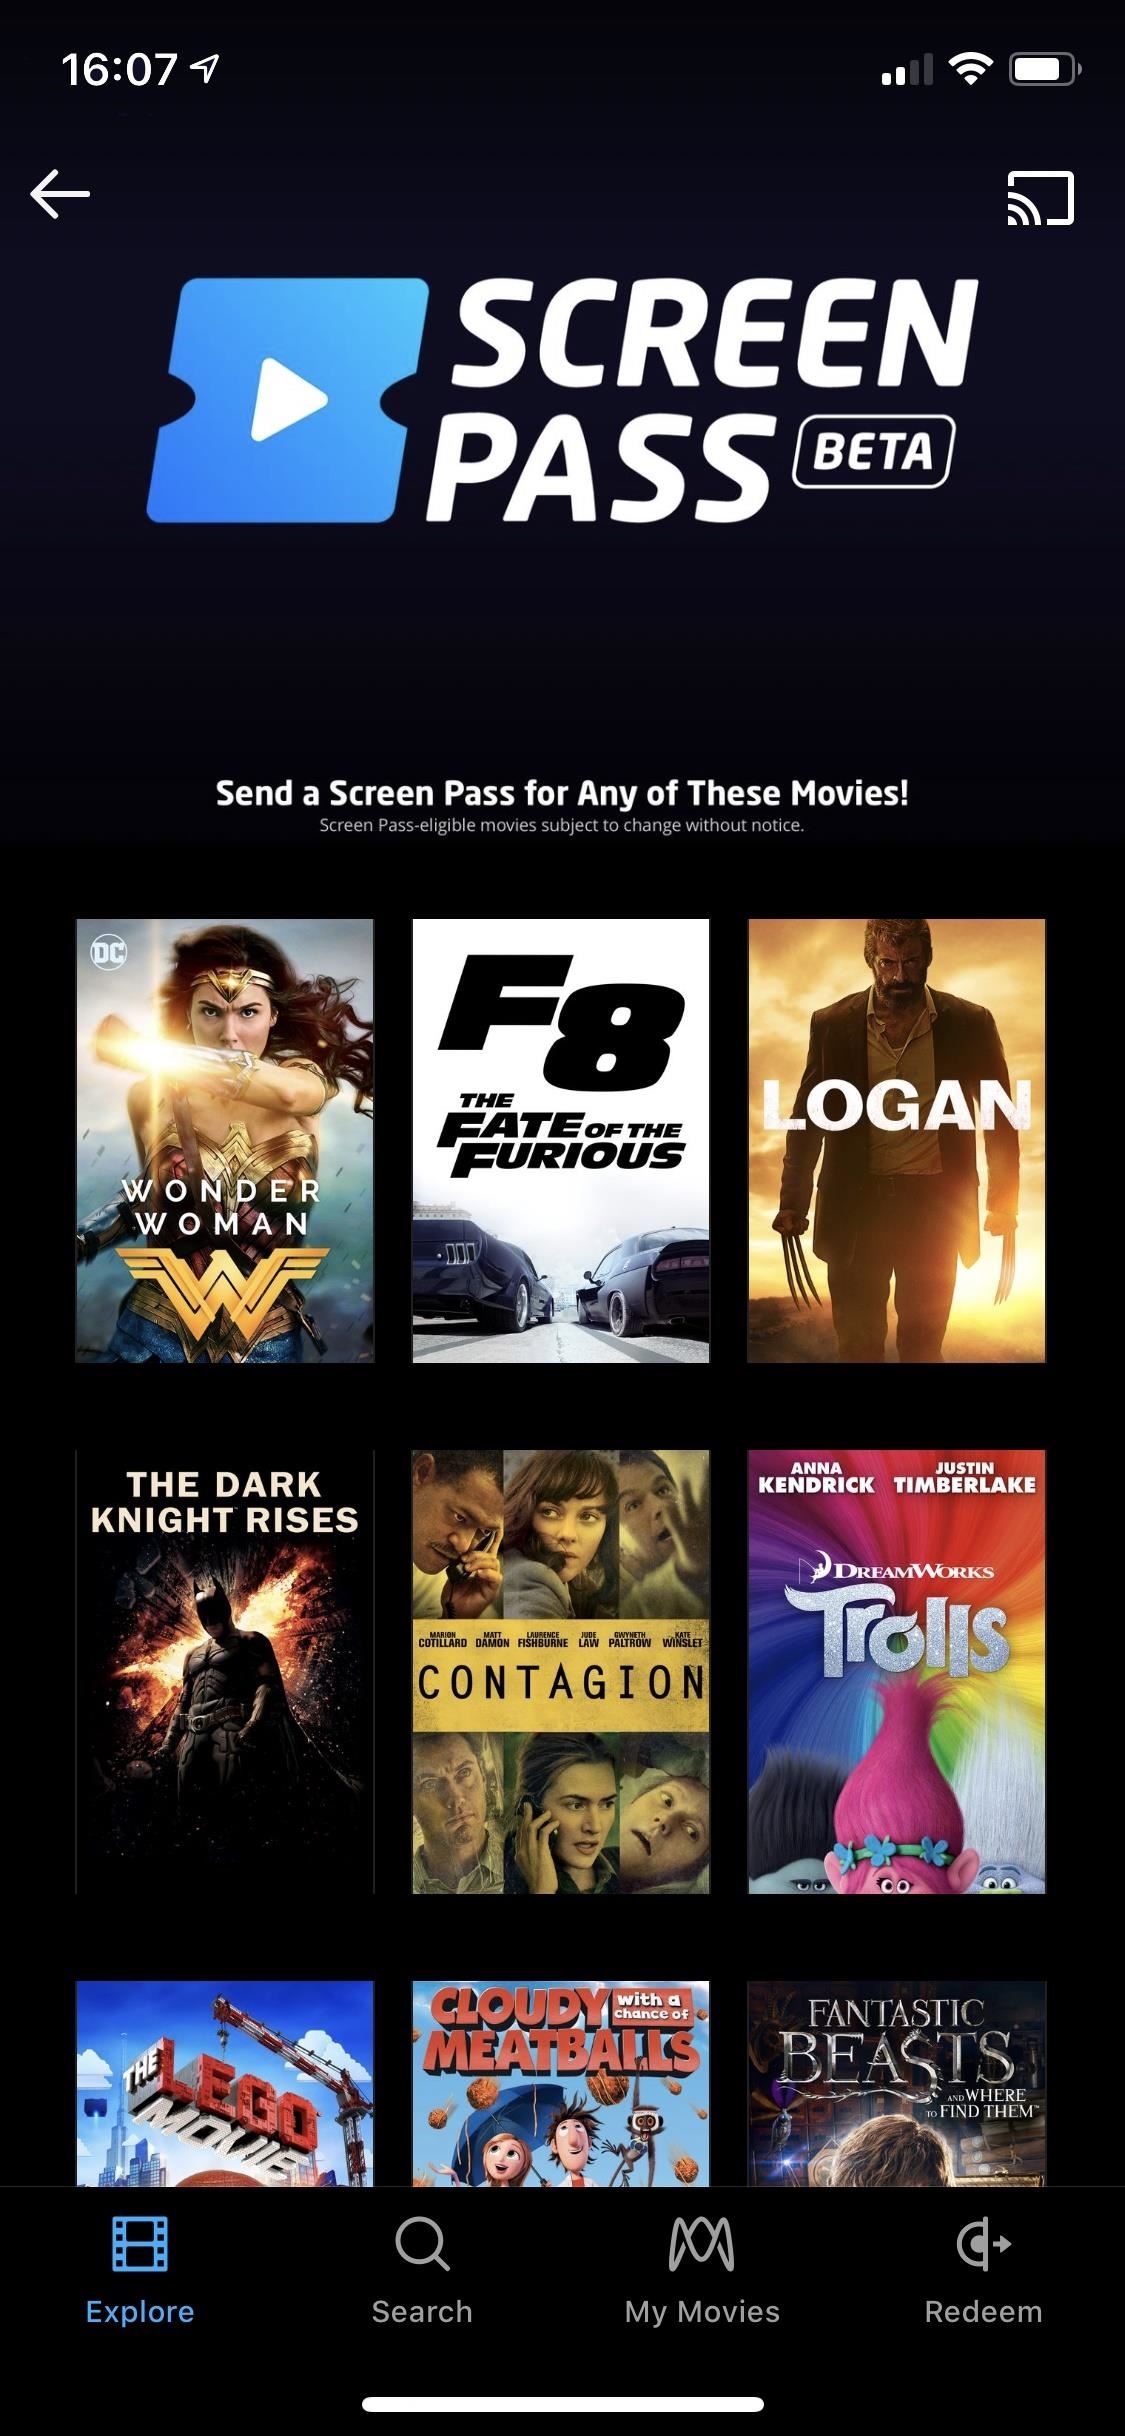 Own a Ton of Digital Movies? Let Others Watch Them for Free with Screen Passes